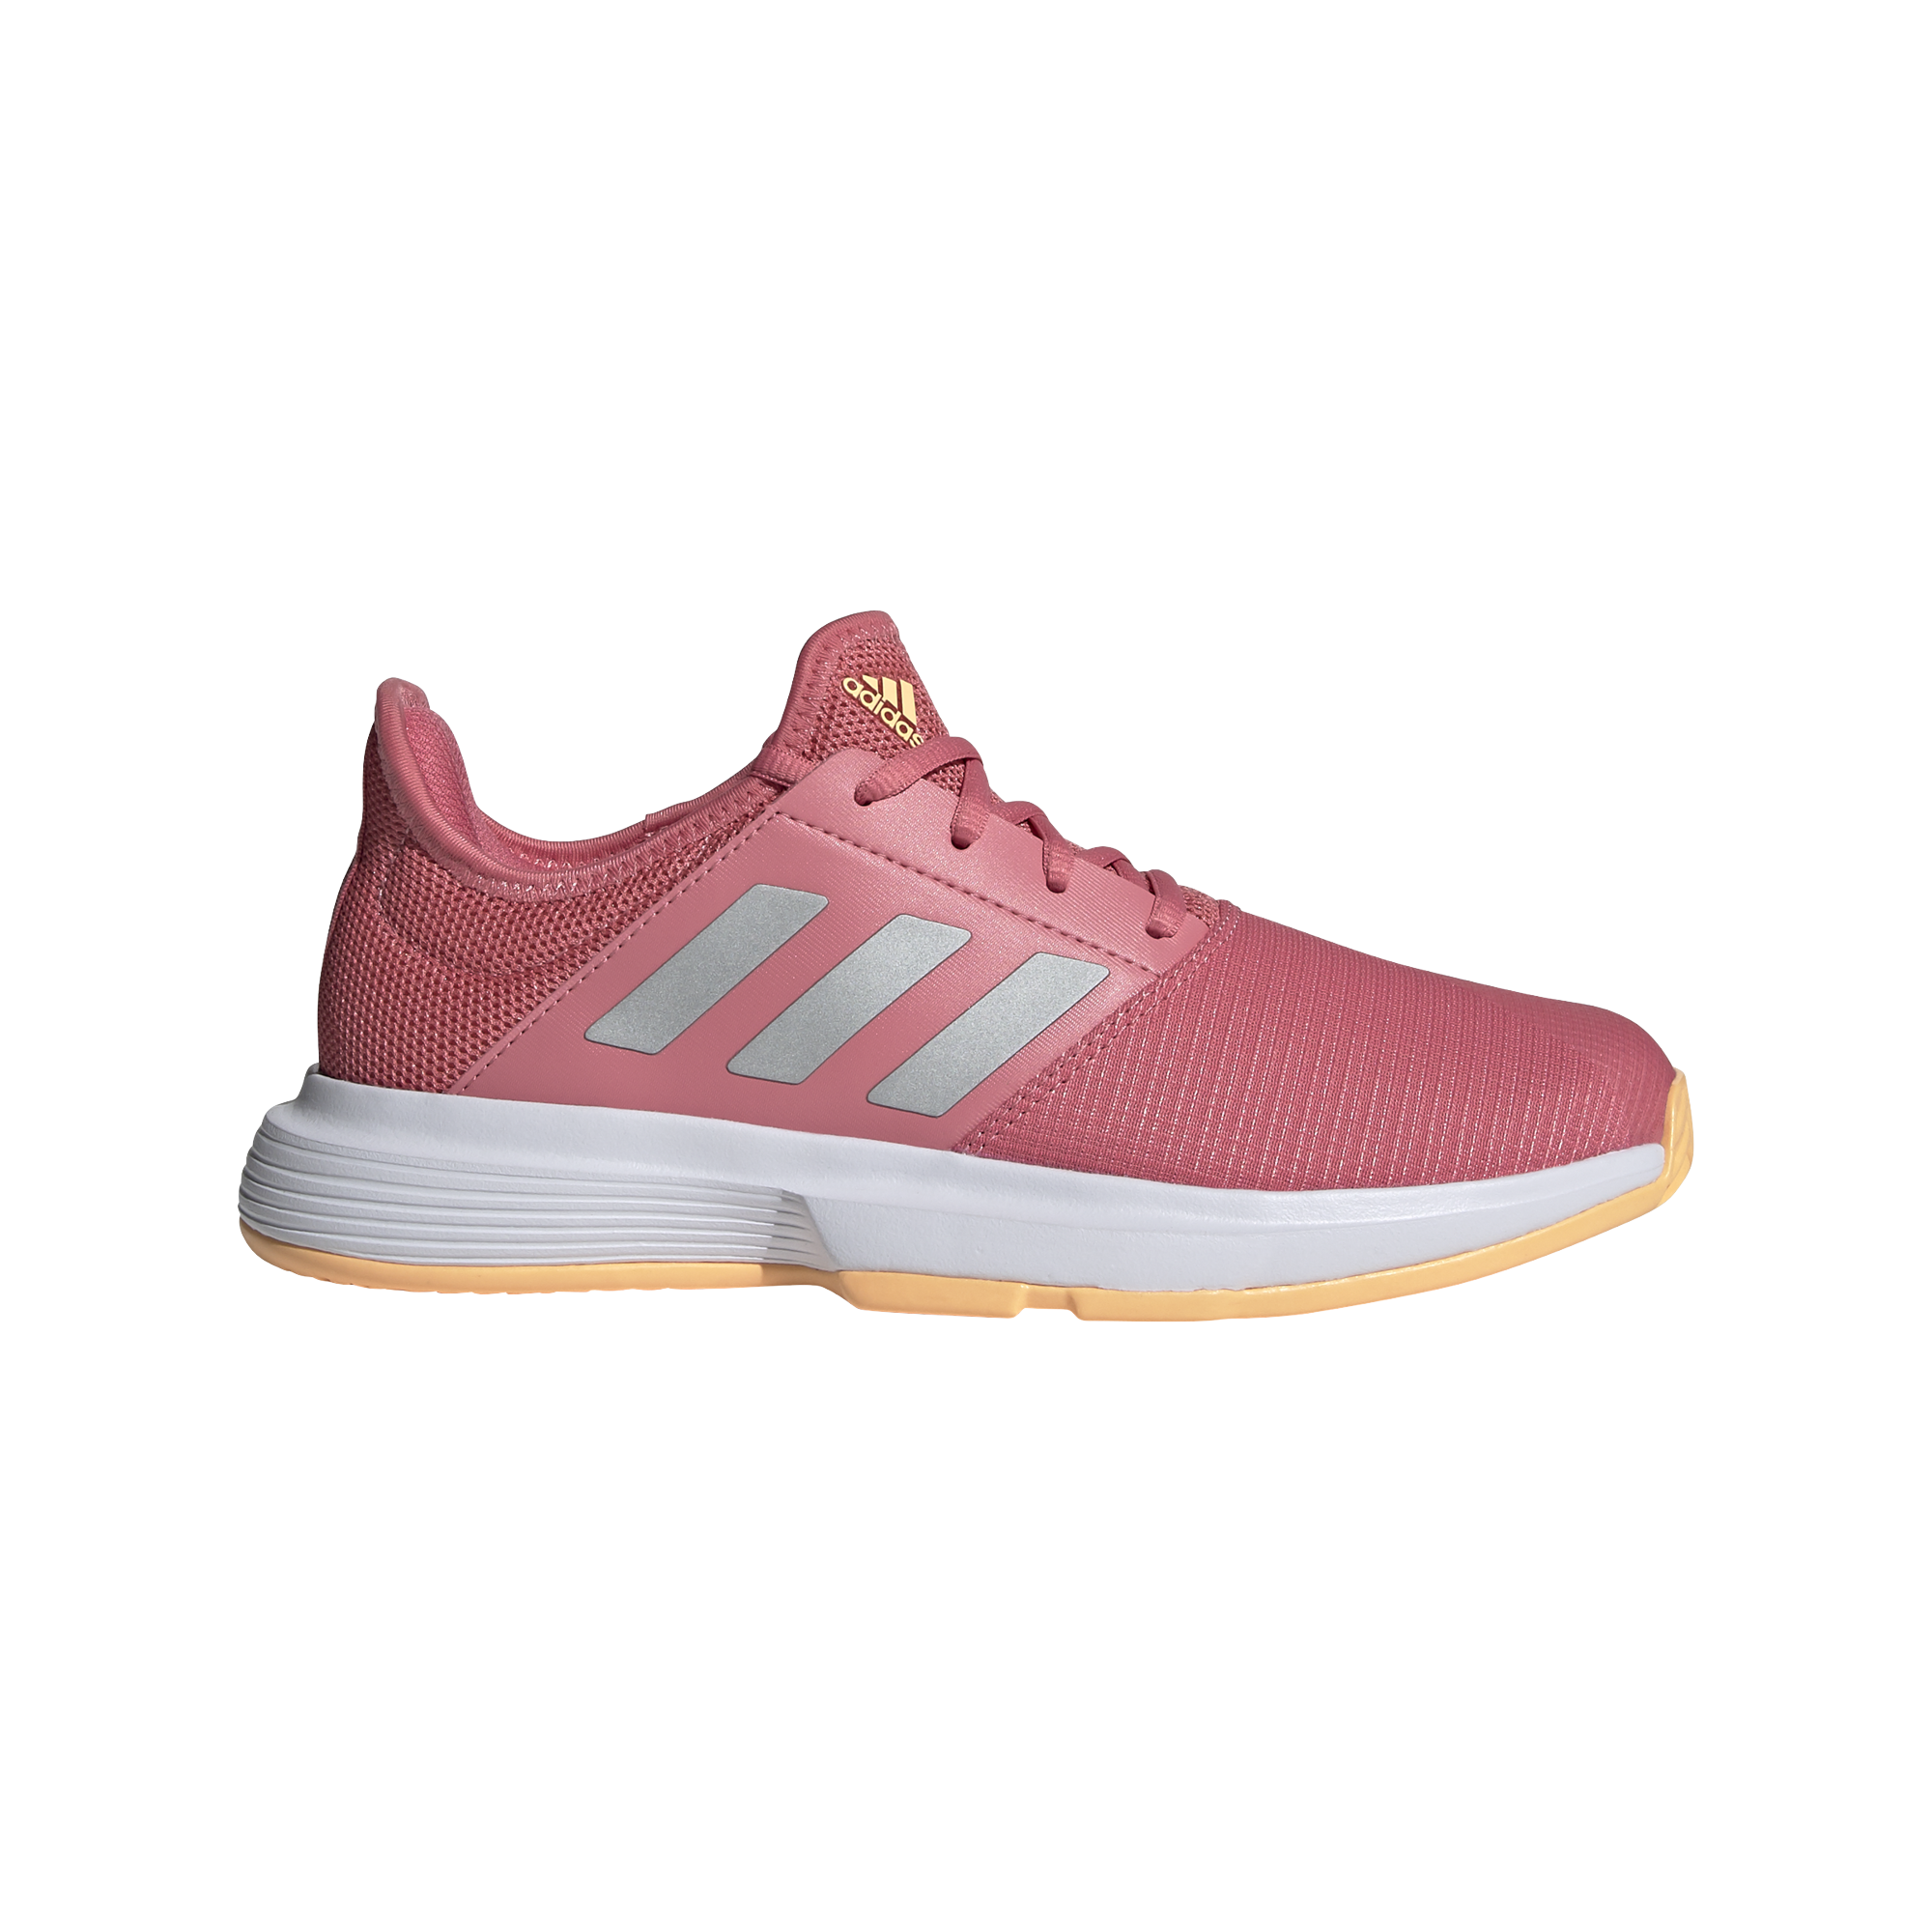 rescue variable clearly Adidas GameCourt Women's Tennis Shoes | PGA TOUR Superstore